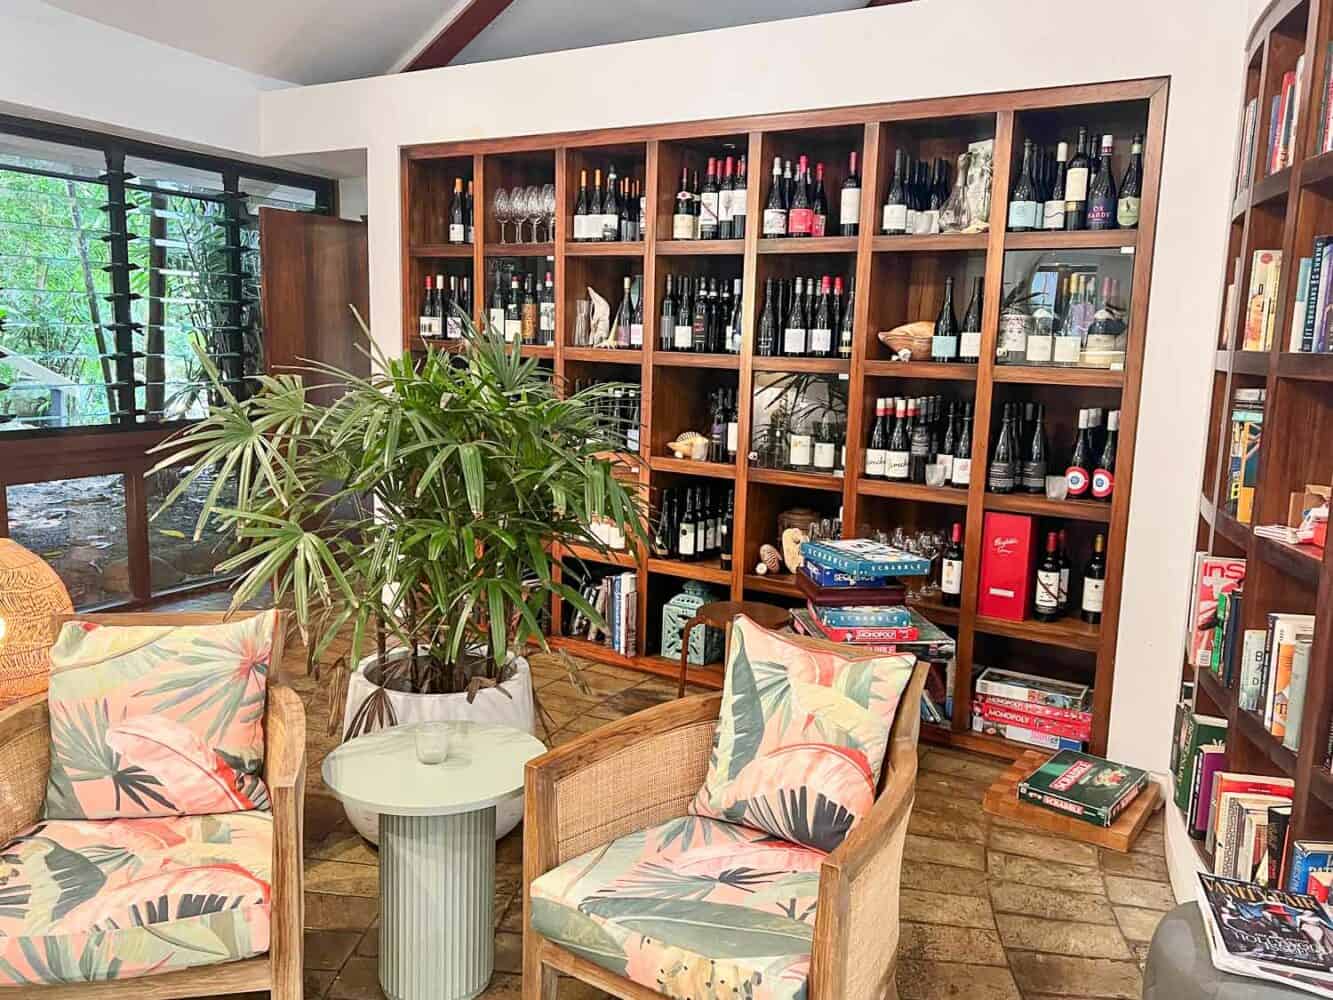 Lounge with wine, books and games at Bedarra Island Resort, Queensland, Australia